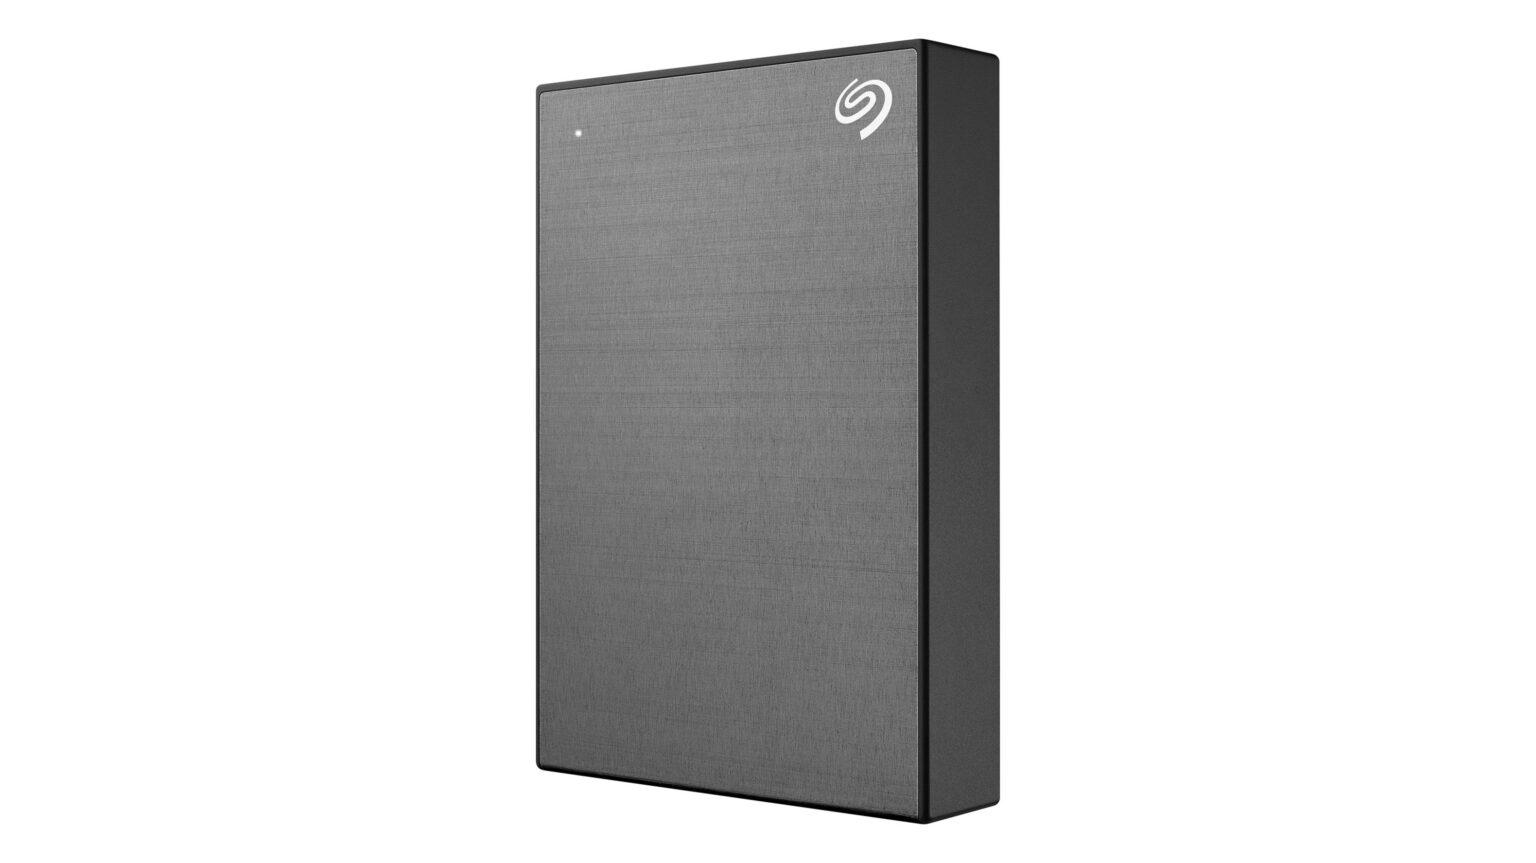 seagate external hard drive switch from mac to pc